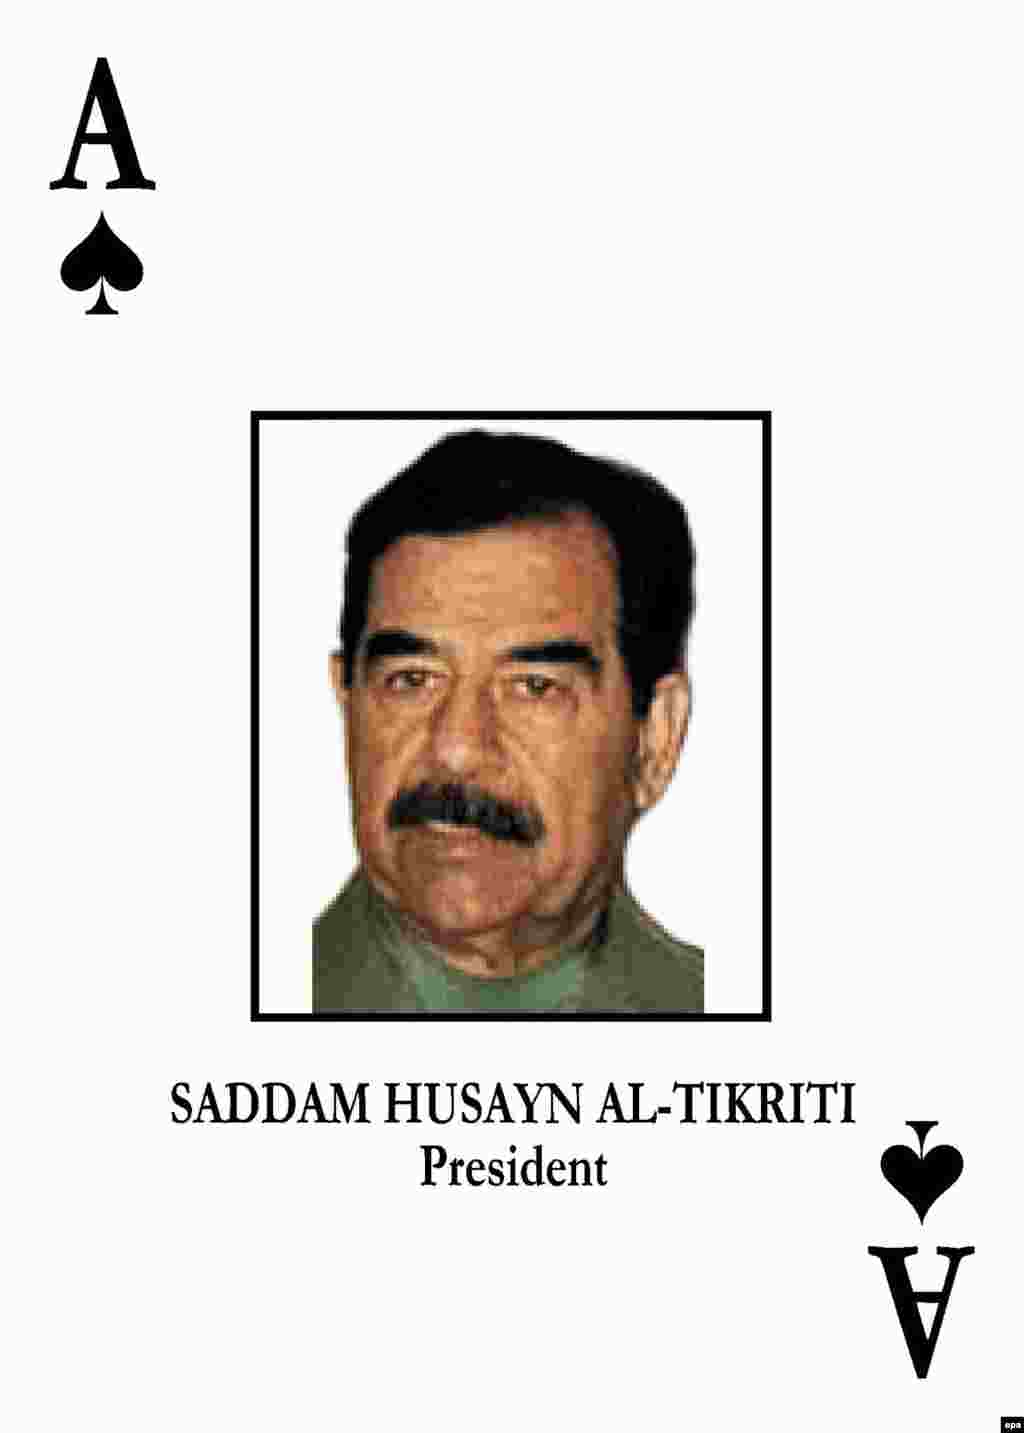 The ace of spades. In 2003 Saddam Hussein was the top target in a deck of playing cards given to U.S. forces to help them identify him and other senior Iraqi officials after the invasion.